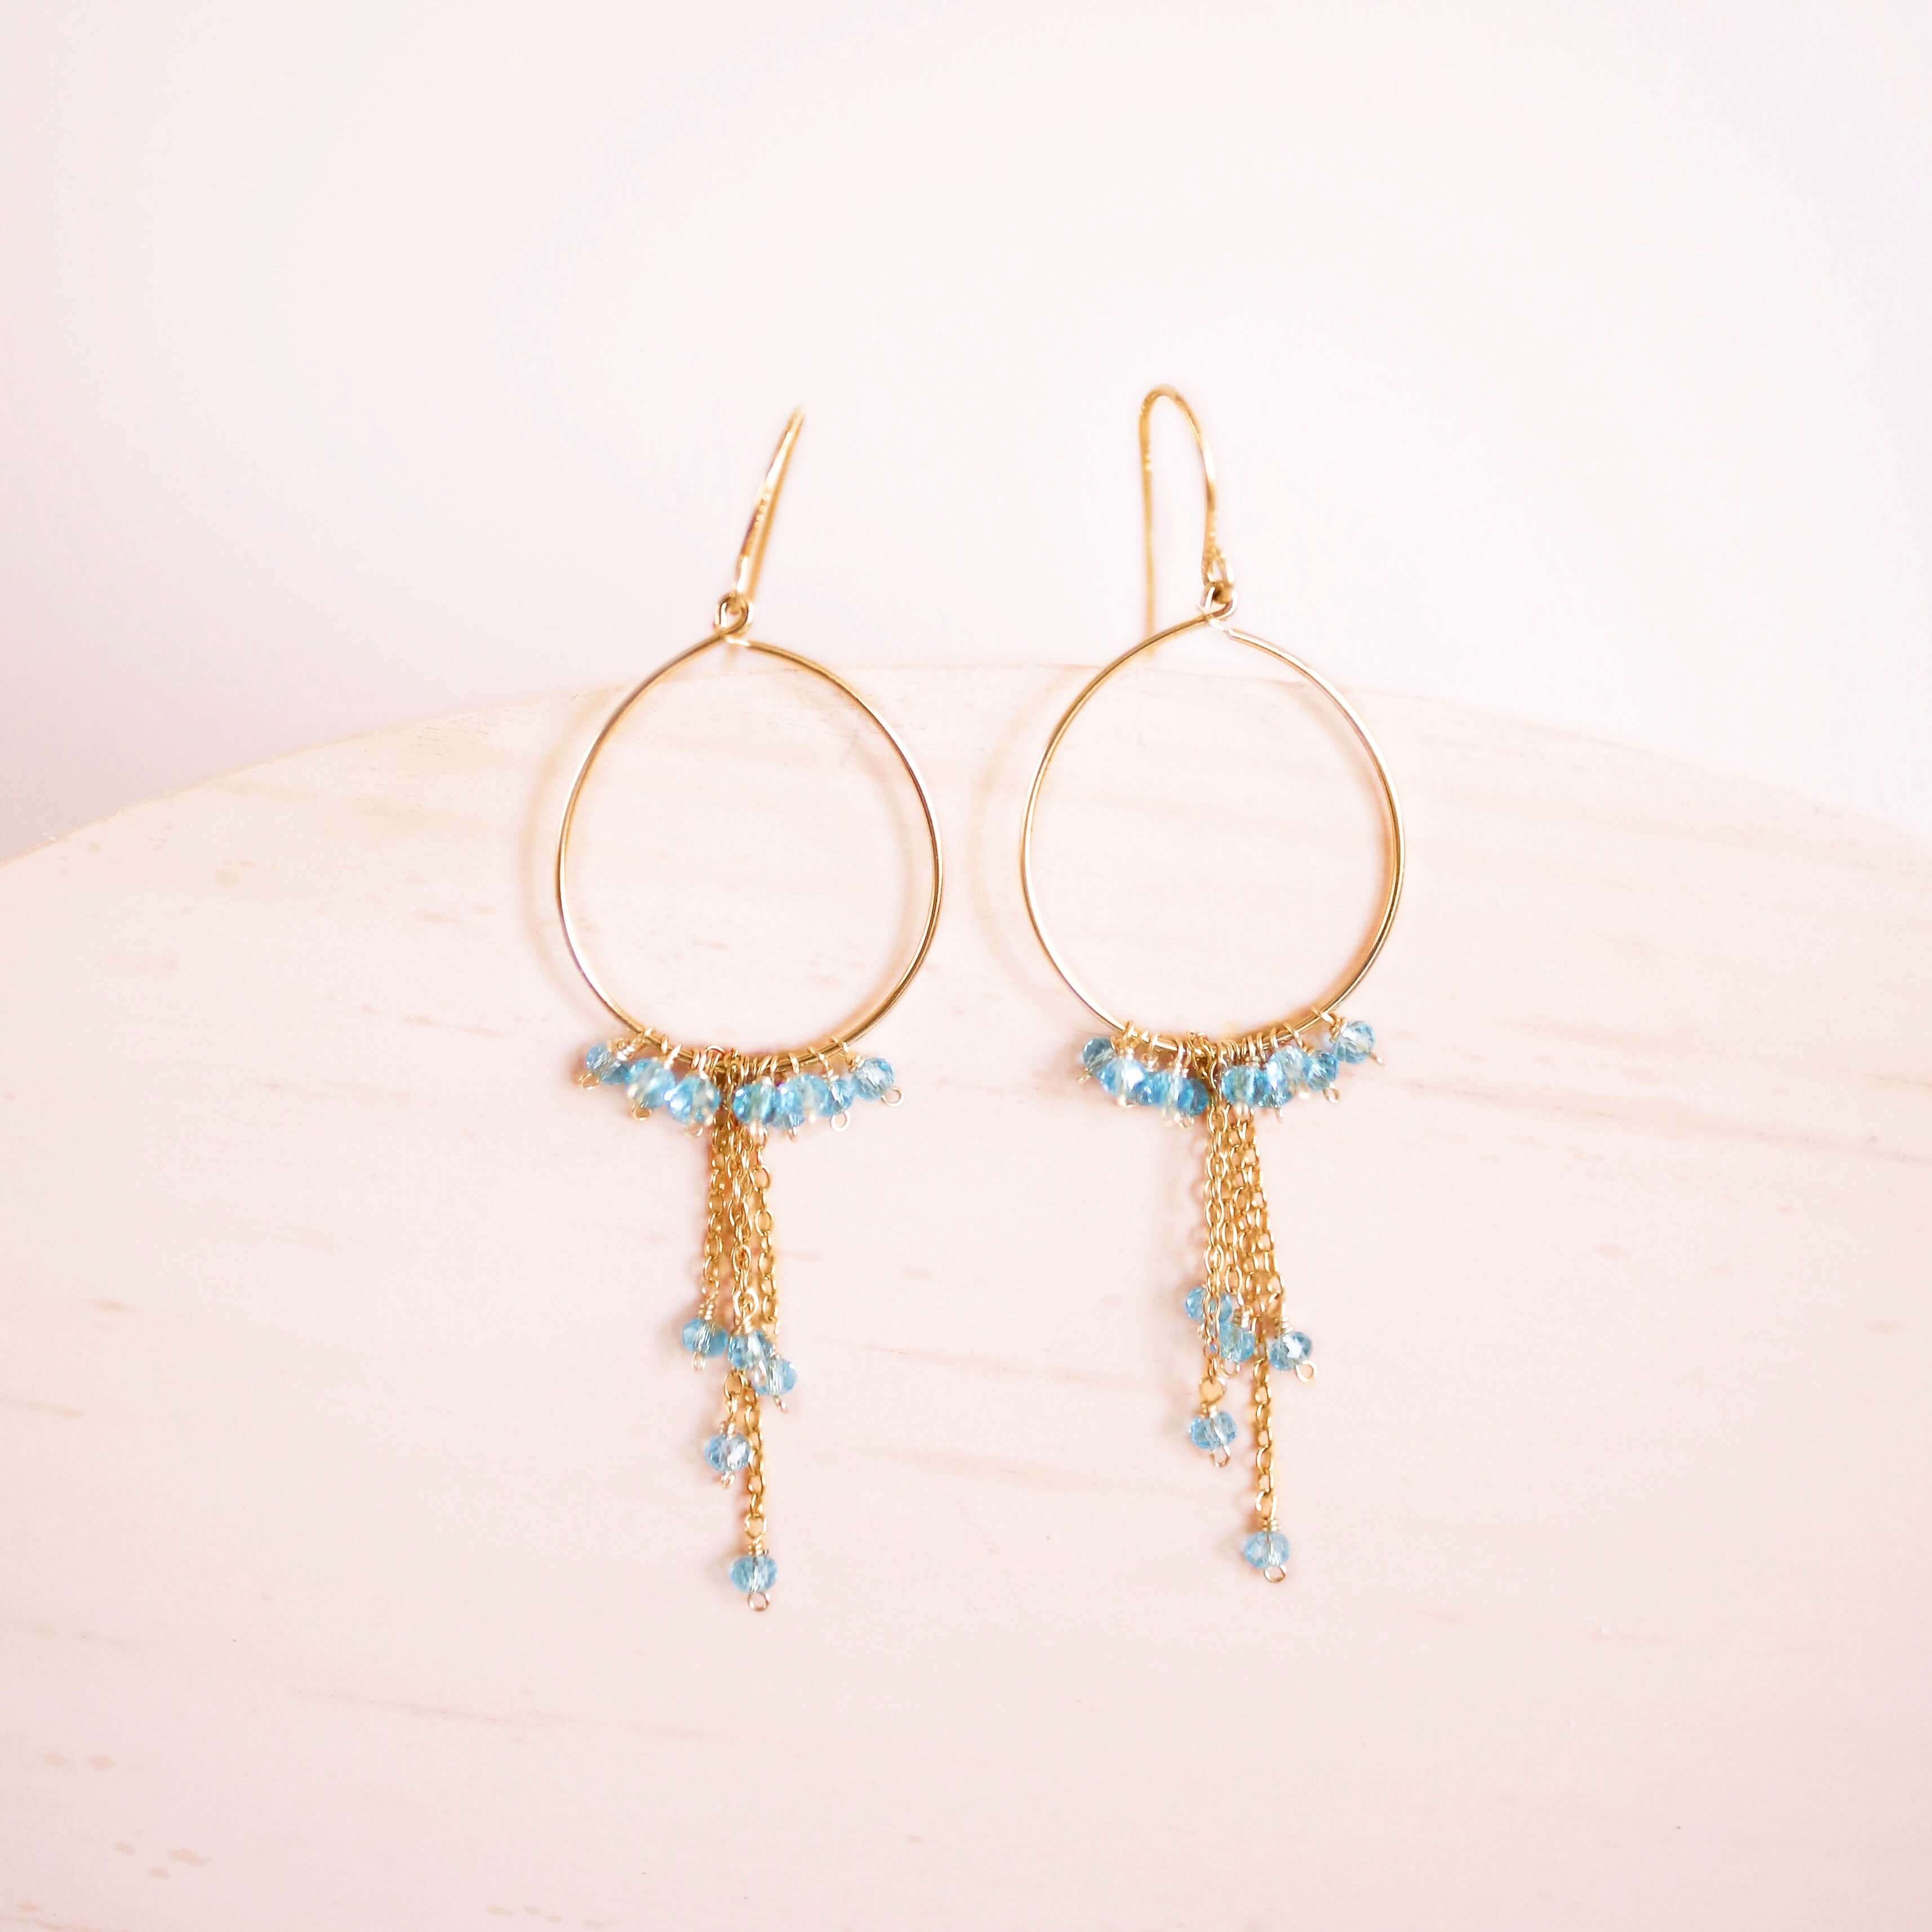 Gold Hoop Earrings with Delicate Chains and Aquamarine Stones